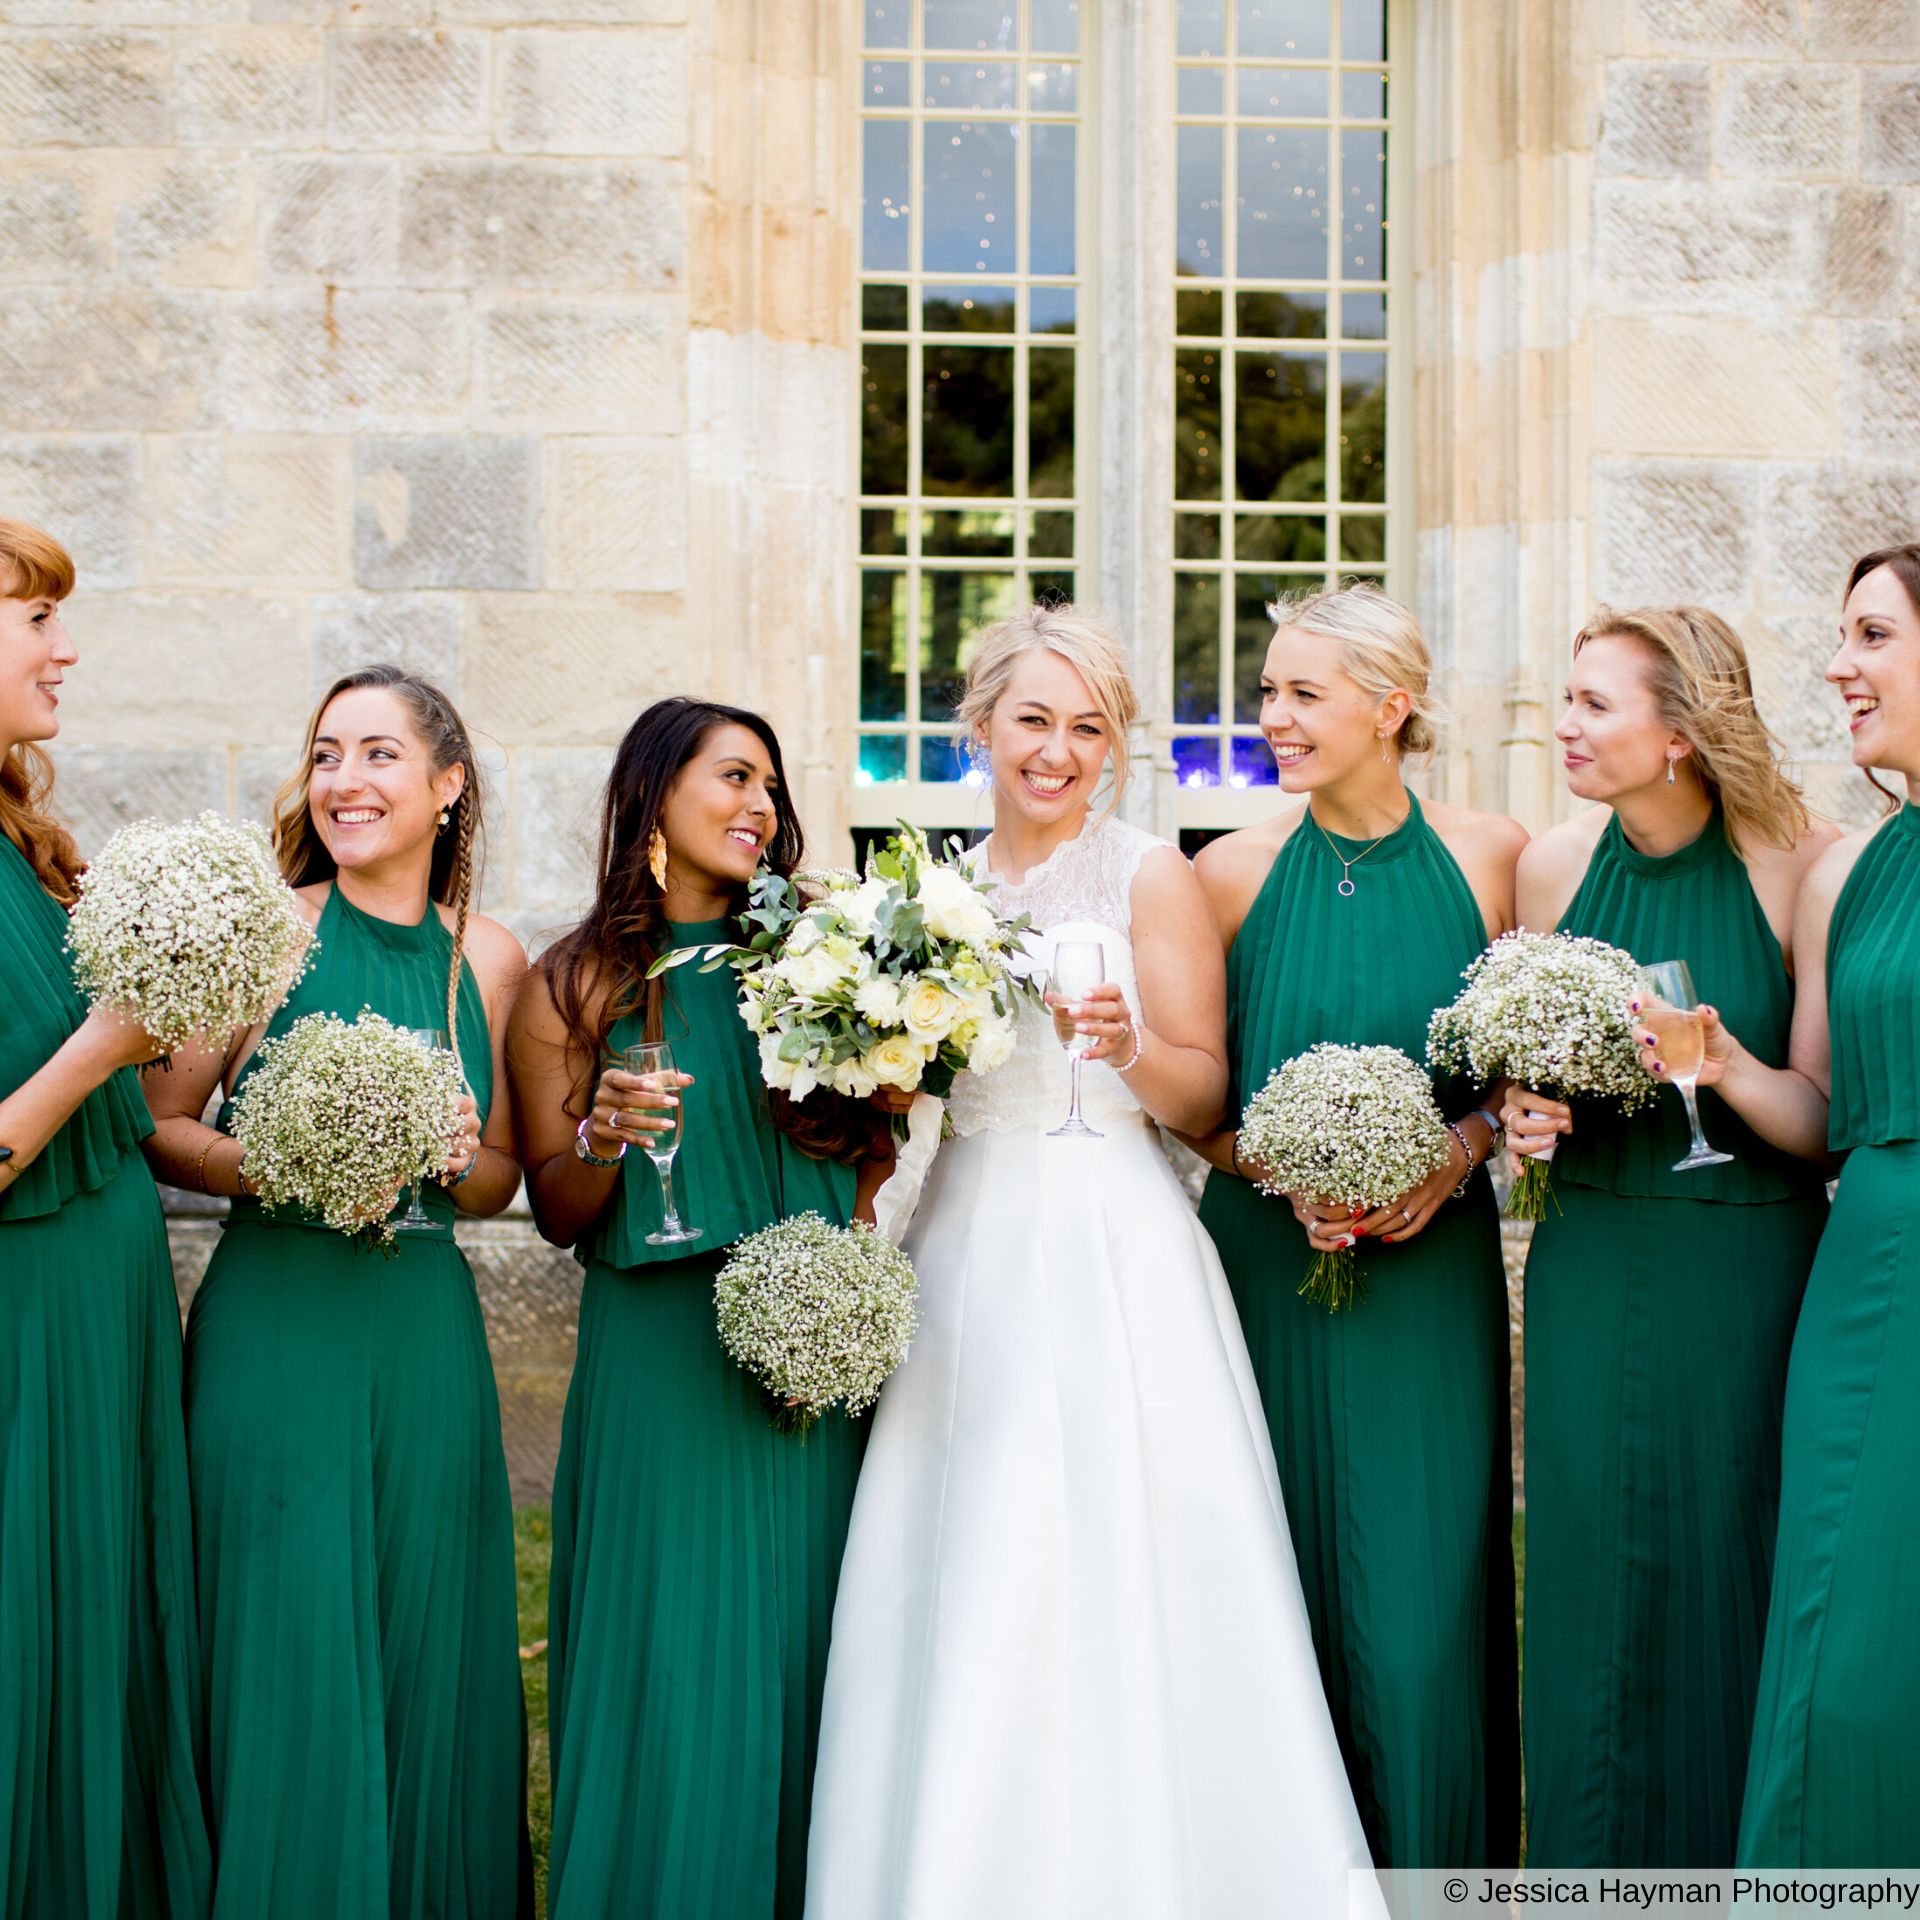 Bride and her bridesmaids dressed in emerald green, smiling and laughing in front of the beautiful stonework backdrop of Highcliffe Castle.